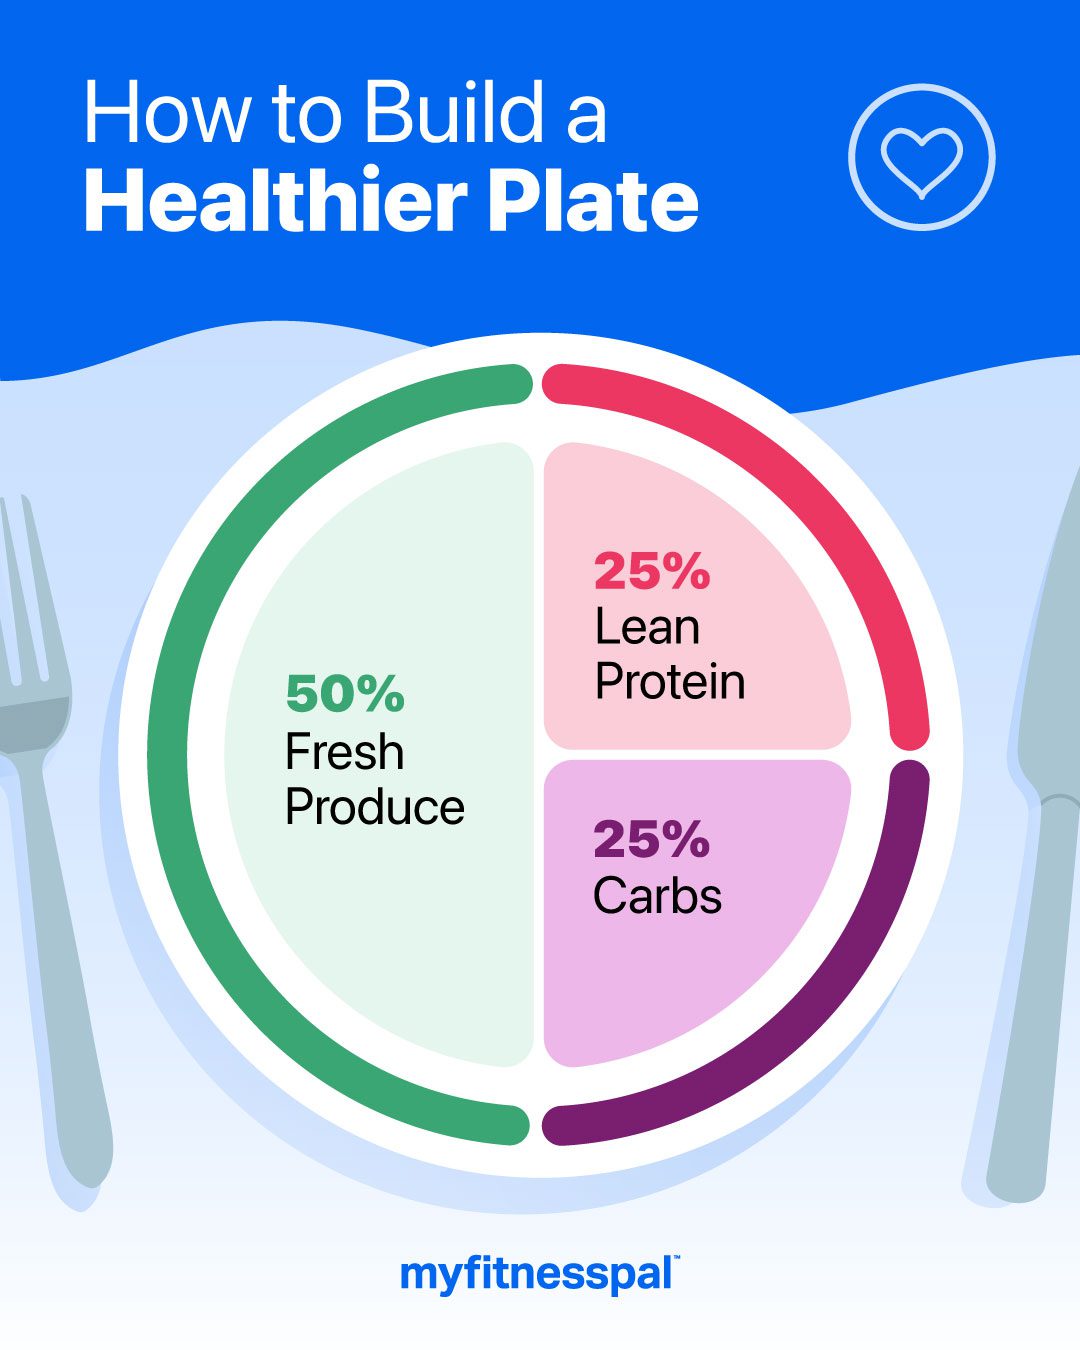 How to Build a Healthier Plate